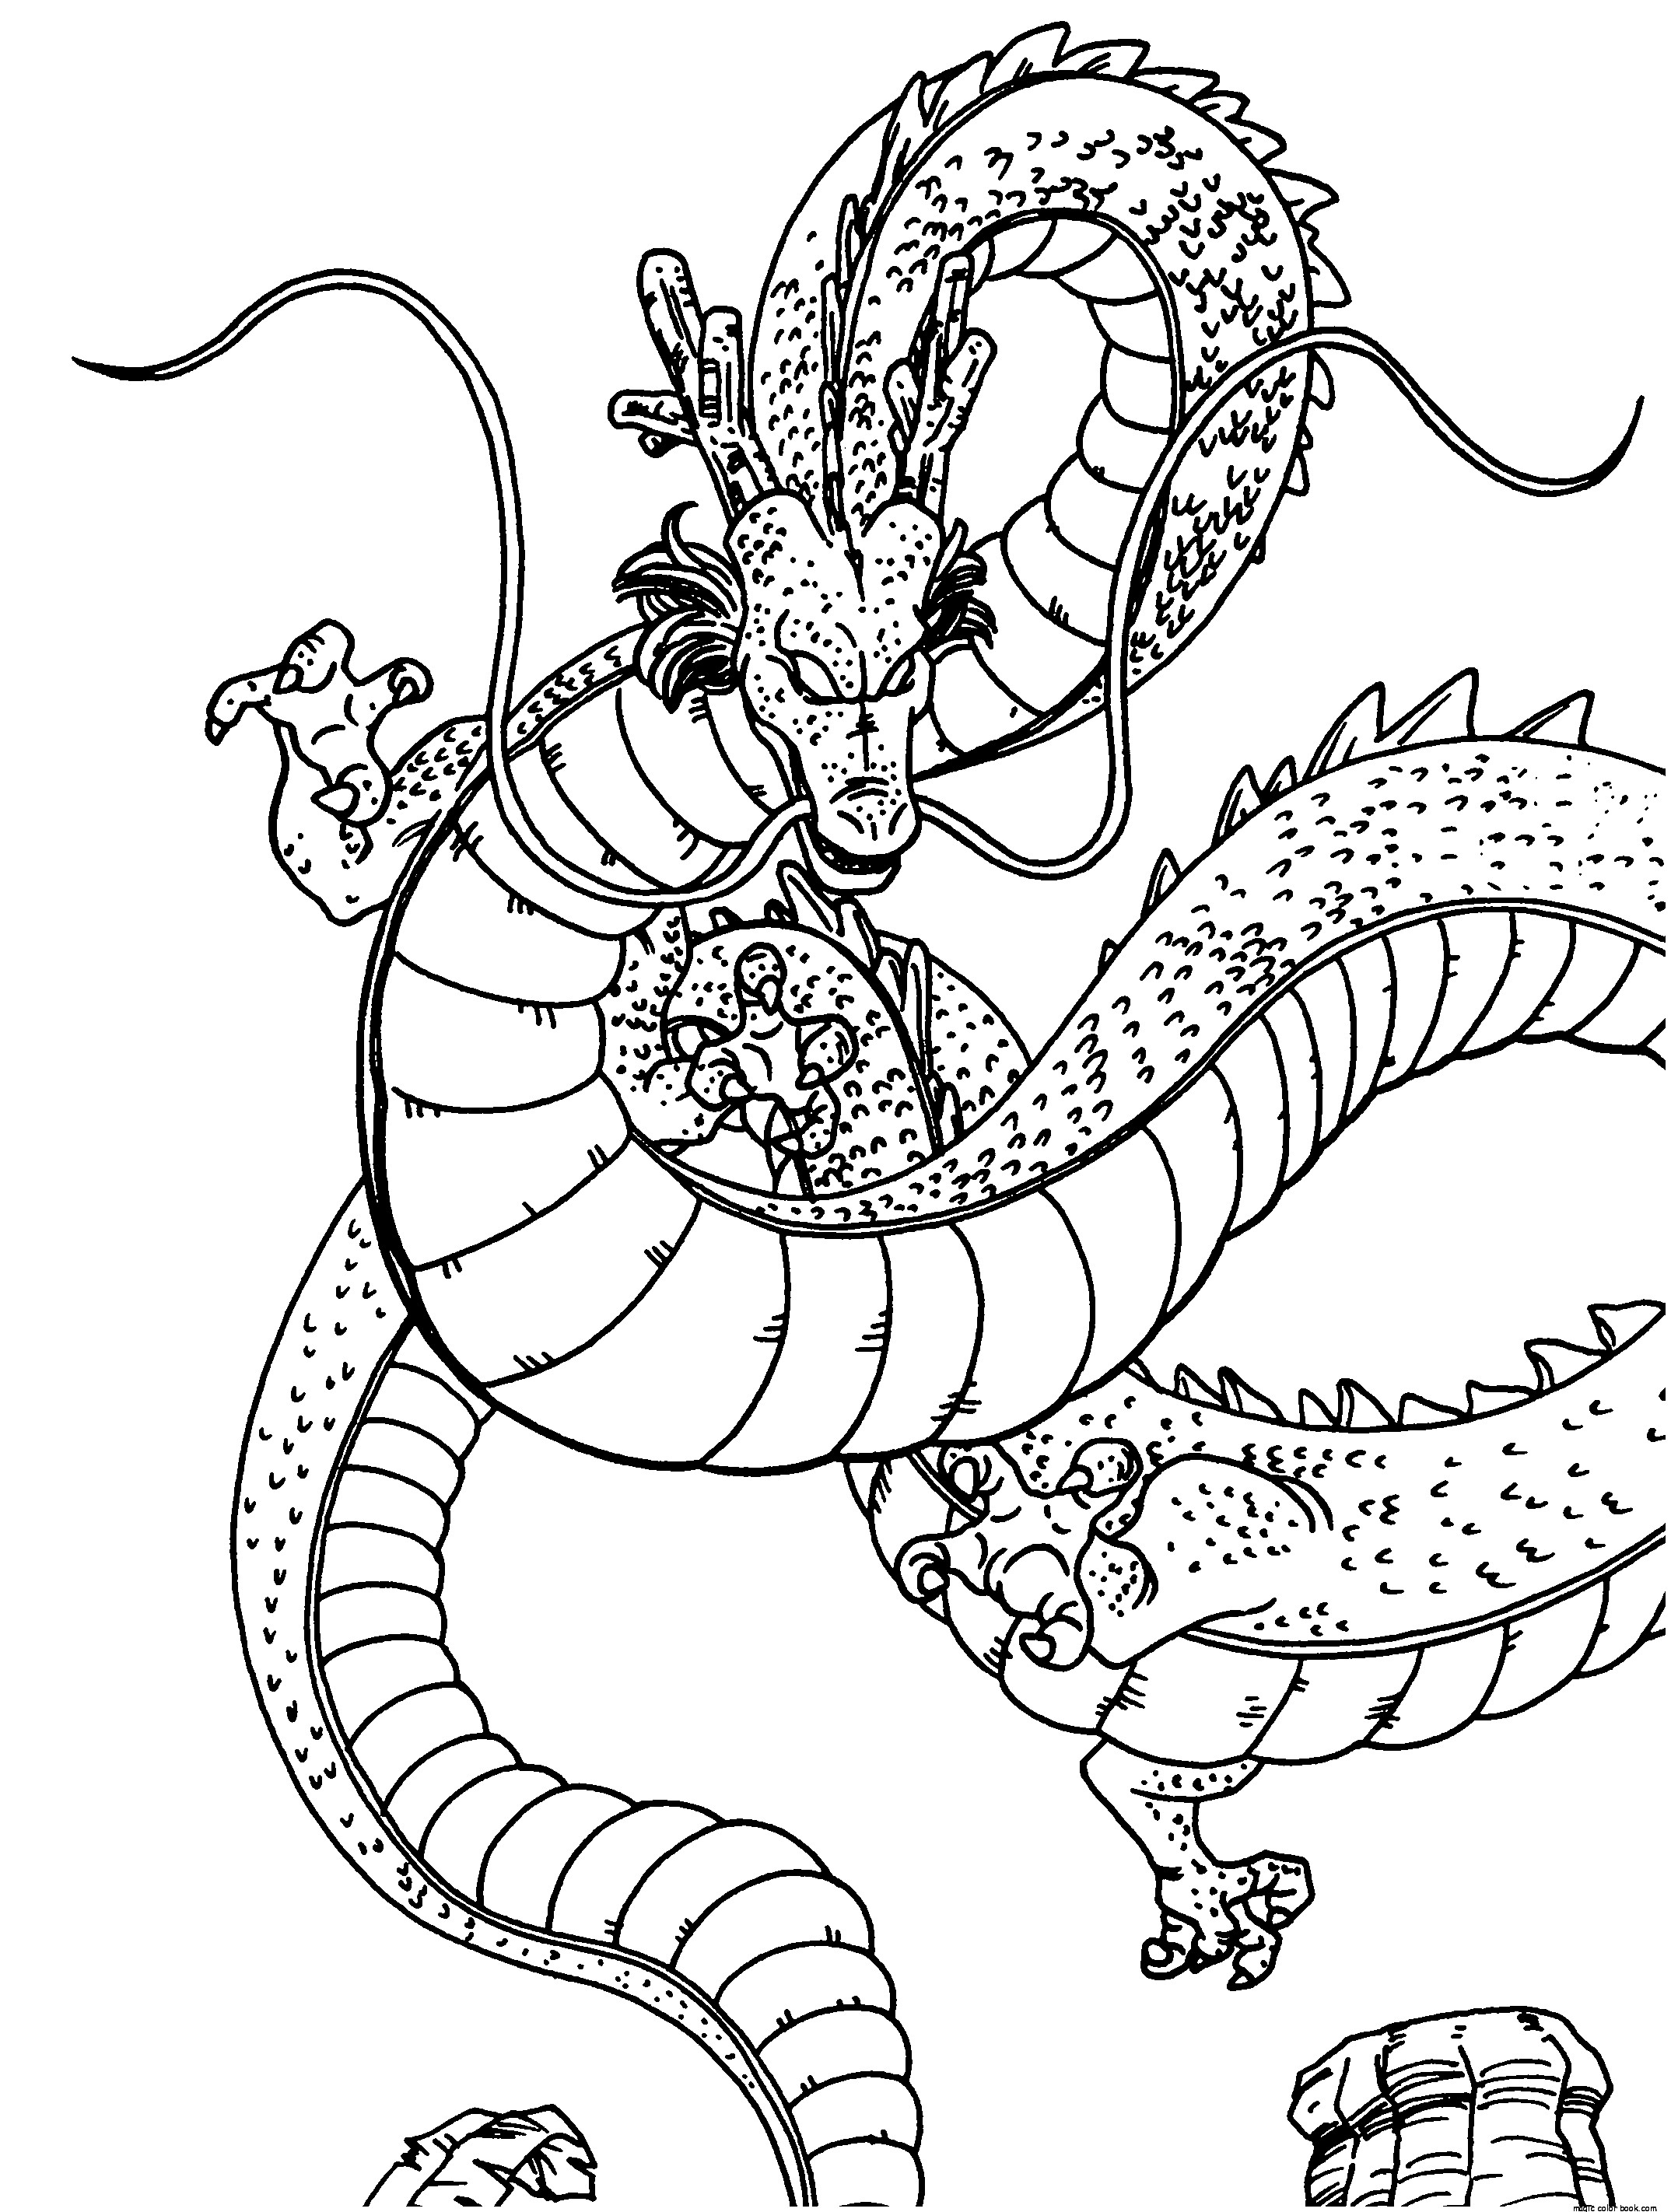 Dragon Ball Z Coloring Pages Games at GetColoringscom